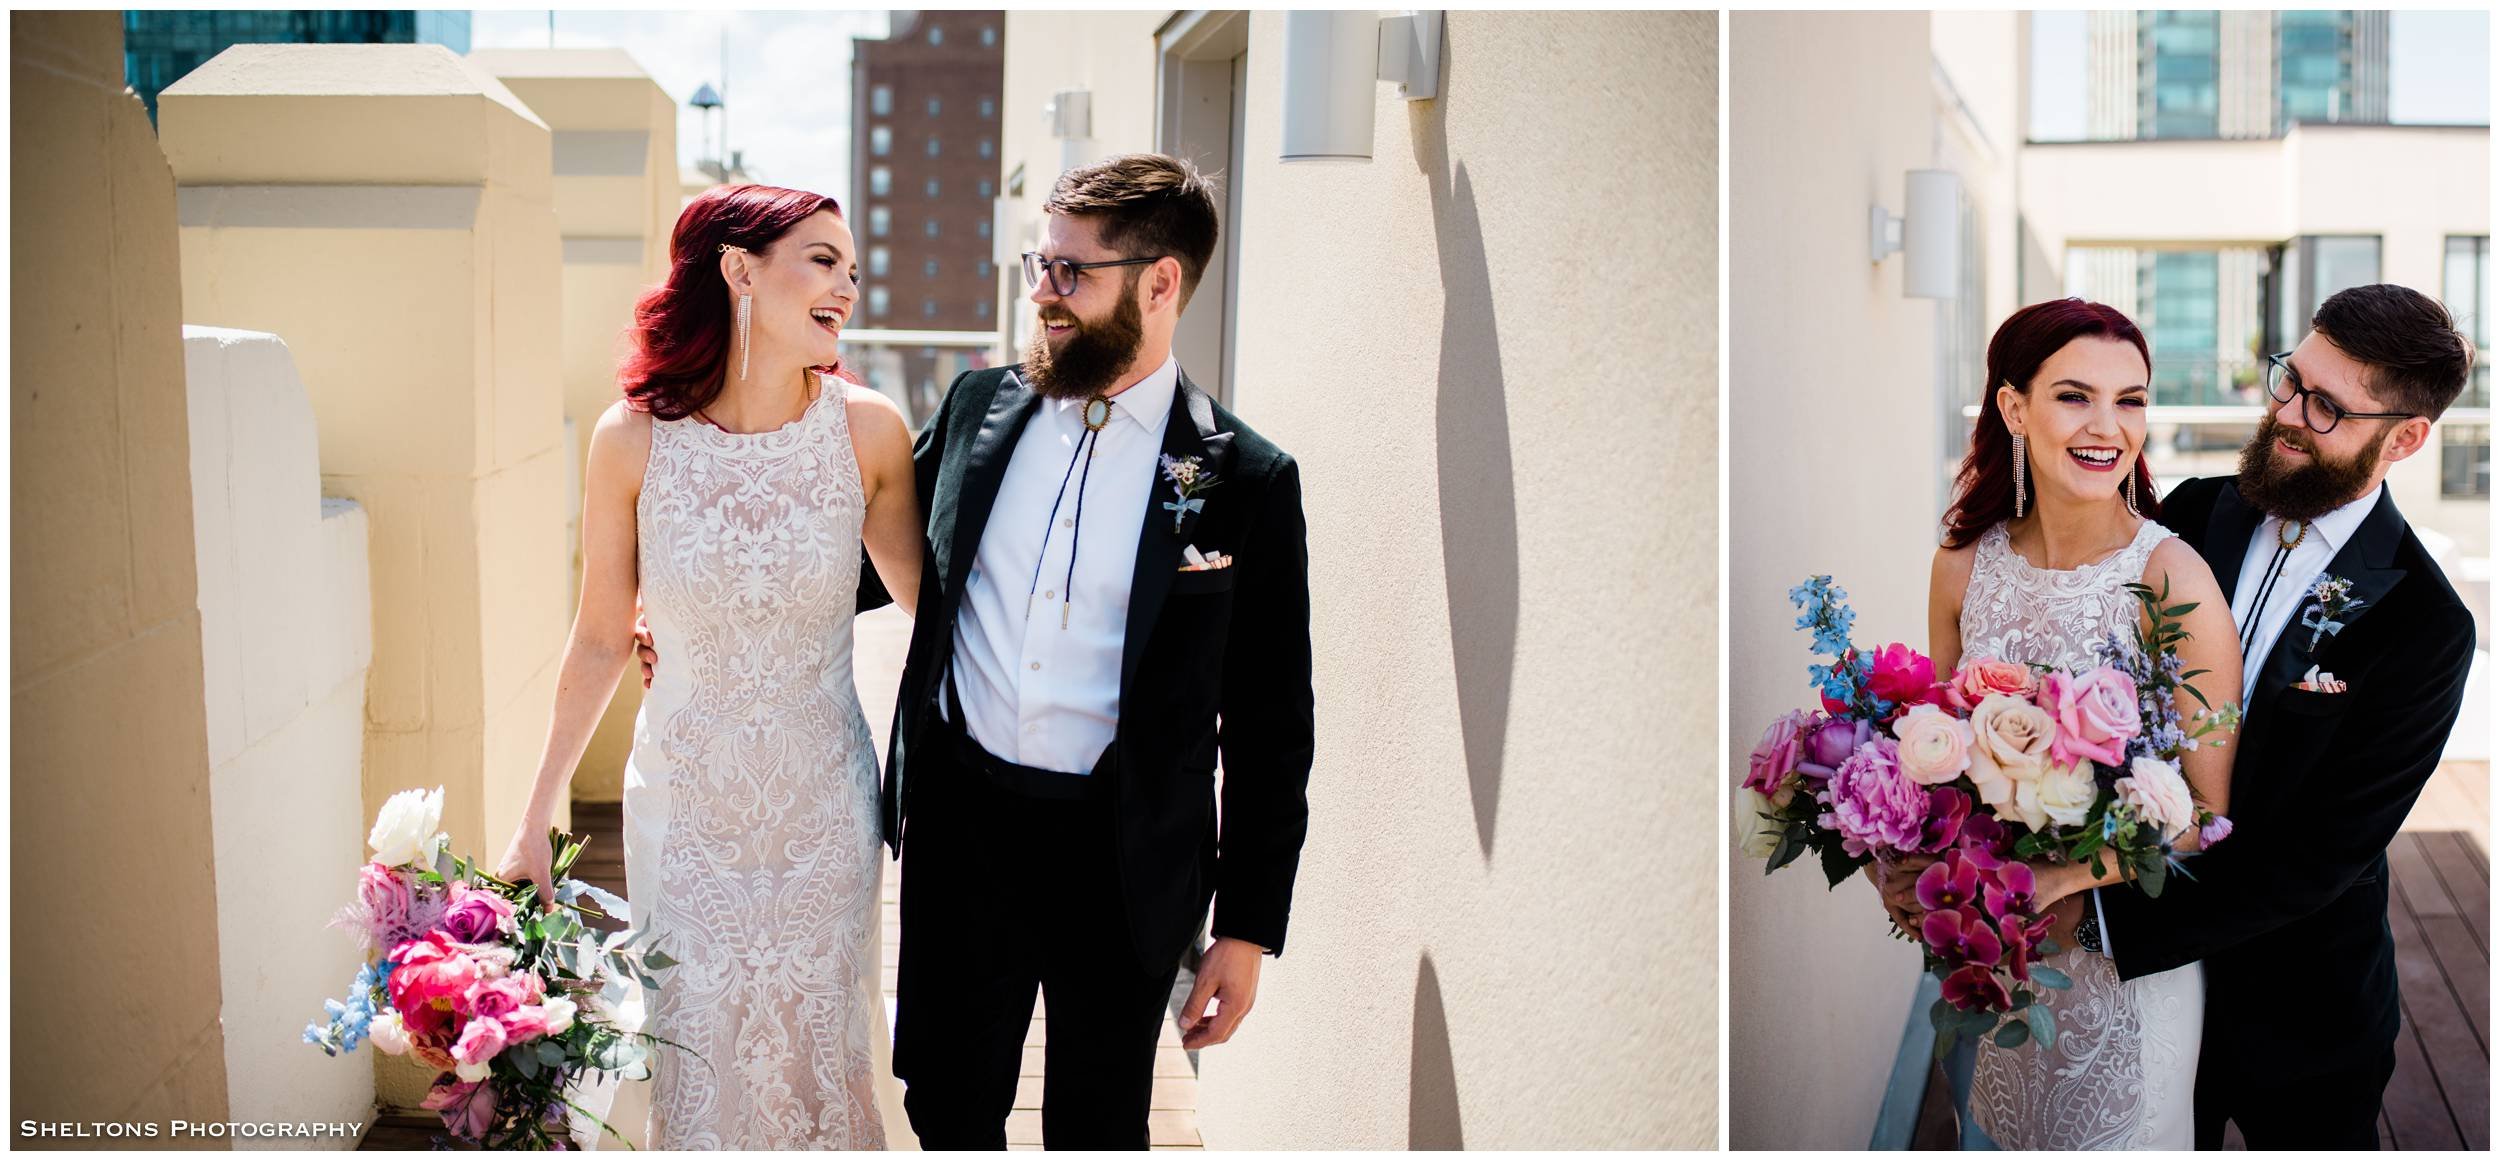 6-Fort-worth-the-sinclair-portraits-rooftop-wedding.jpg